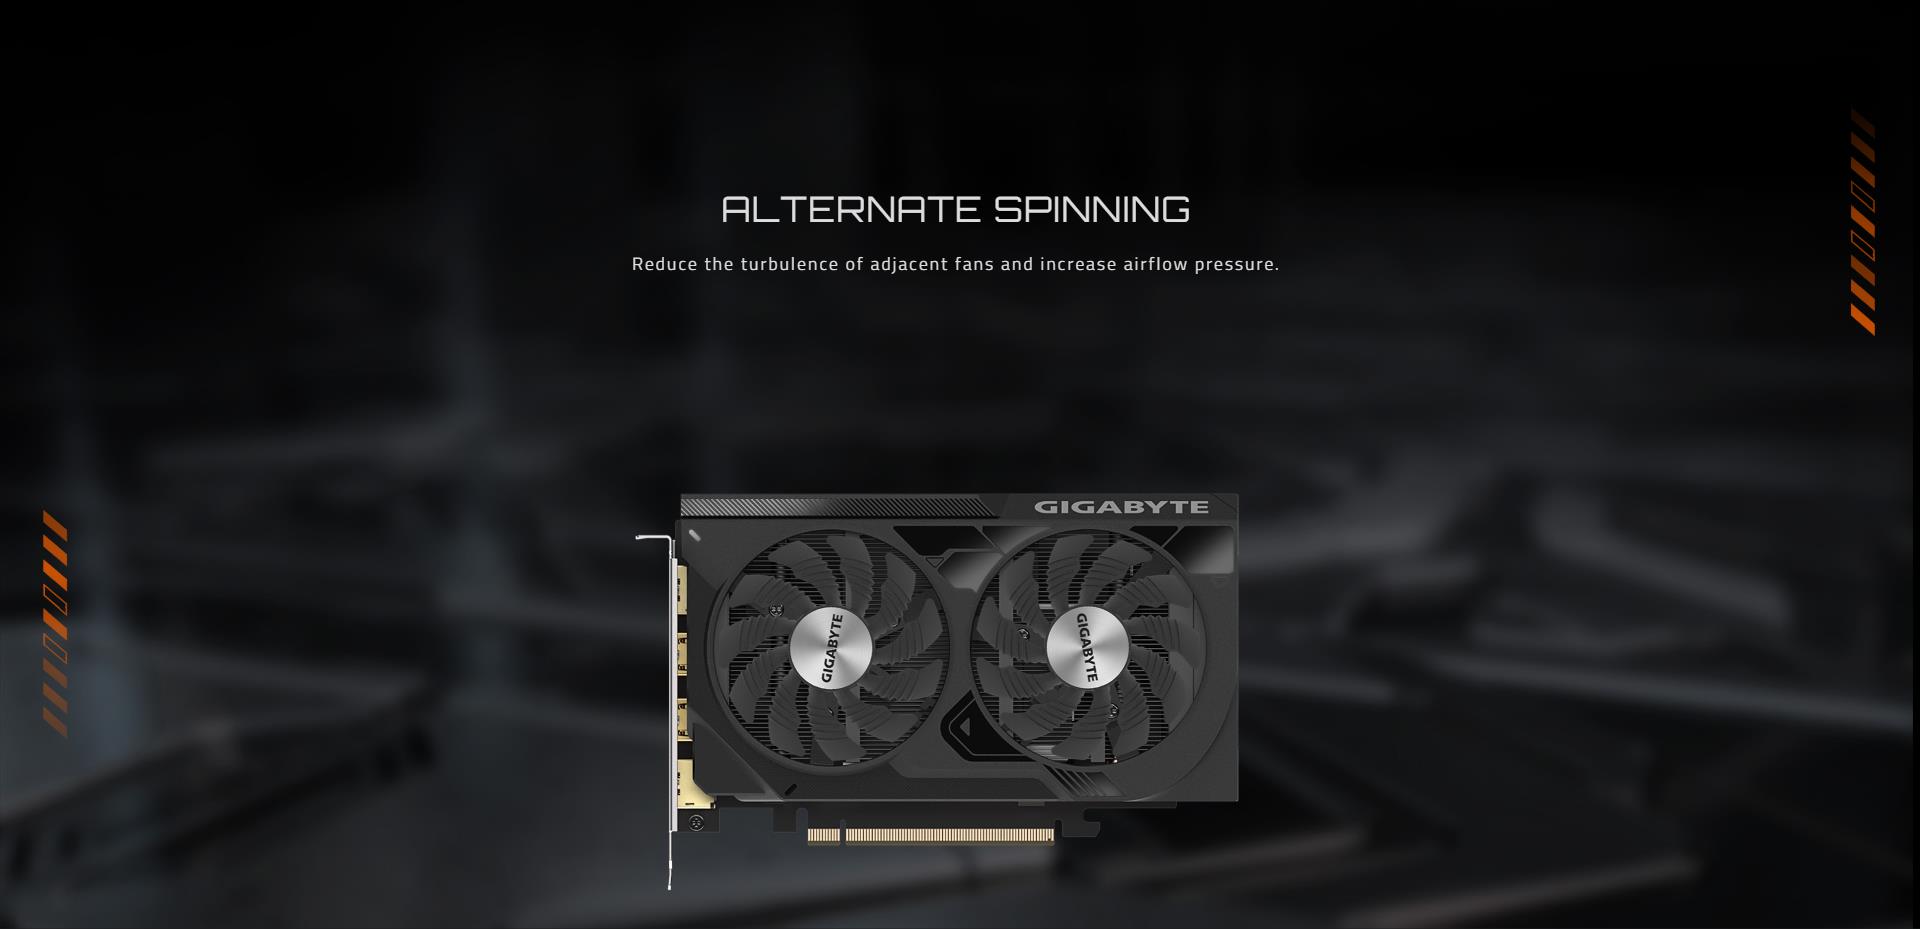 A large marketing image providing additional information about the product Gigabyte GeForce RTX 4060 Windforce OC 8GB GDDR6 - Additional alt info not provided